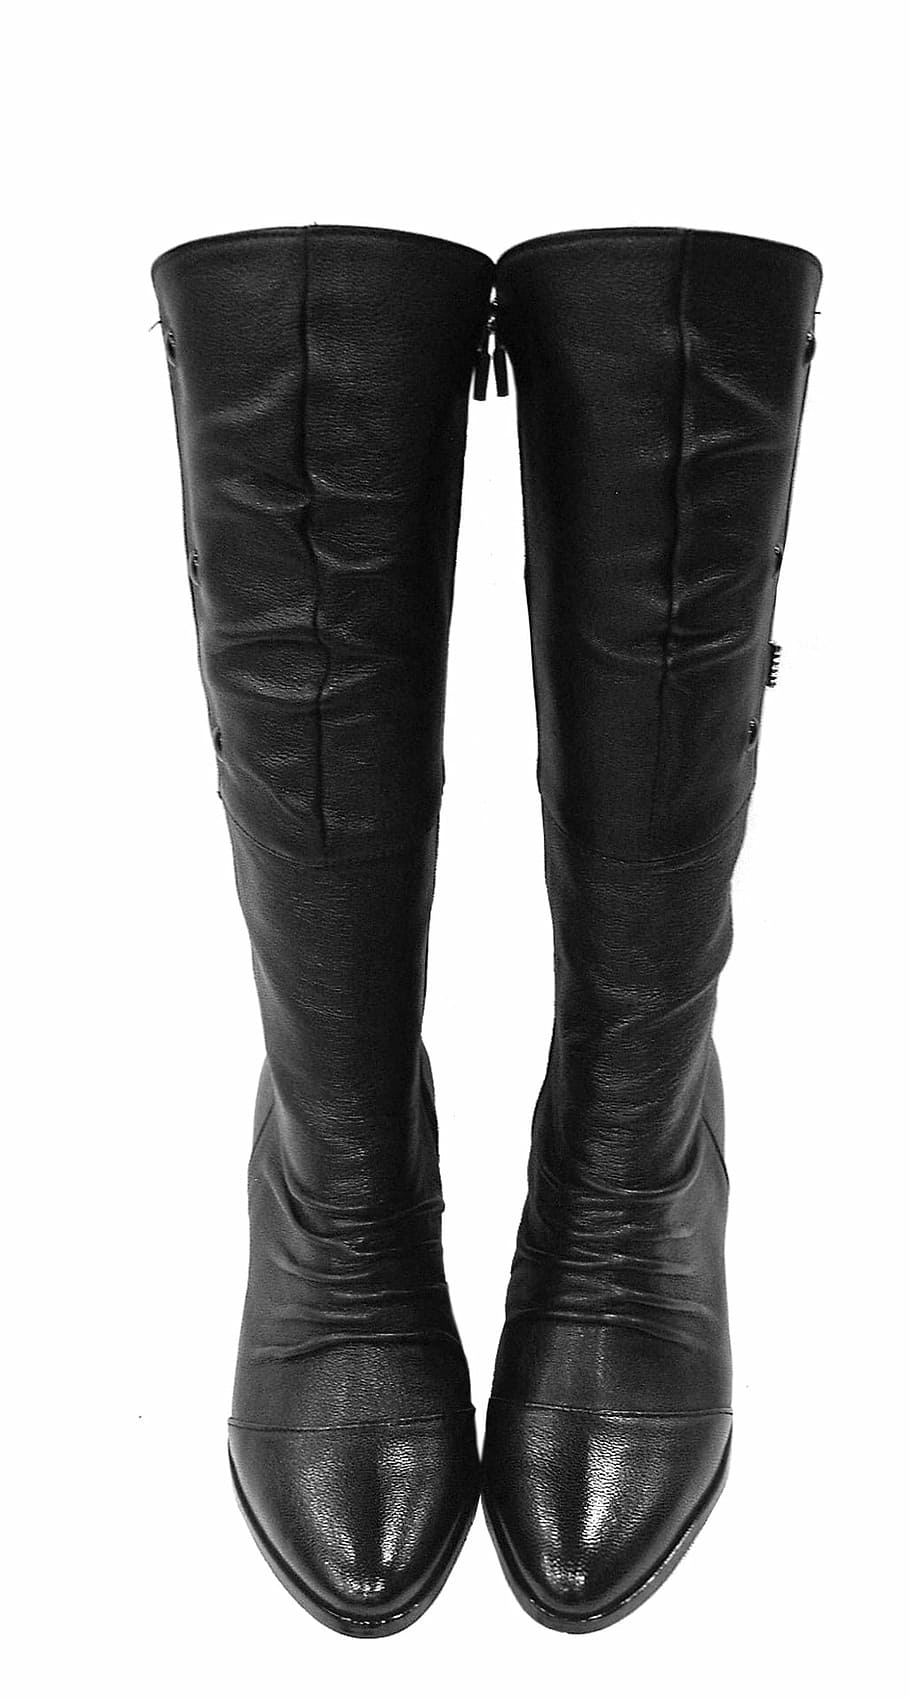 pair, women, black, leather knee-high boots, boots, shoes, shoe, fashion, black shoes, hill